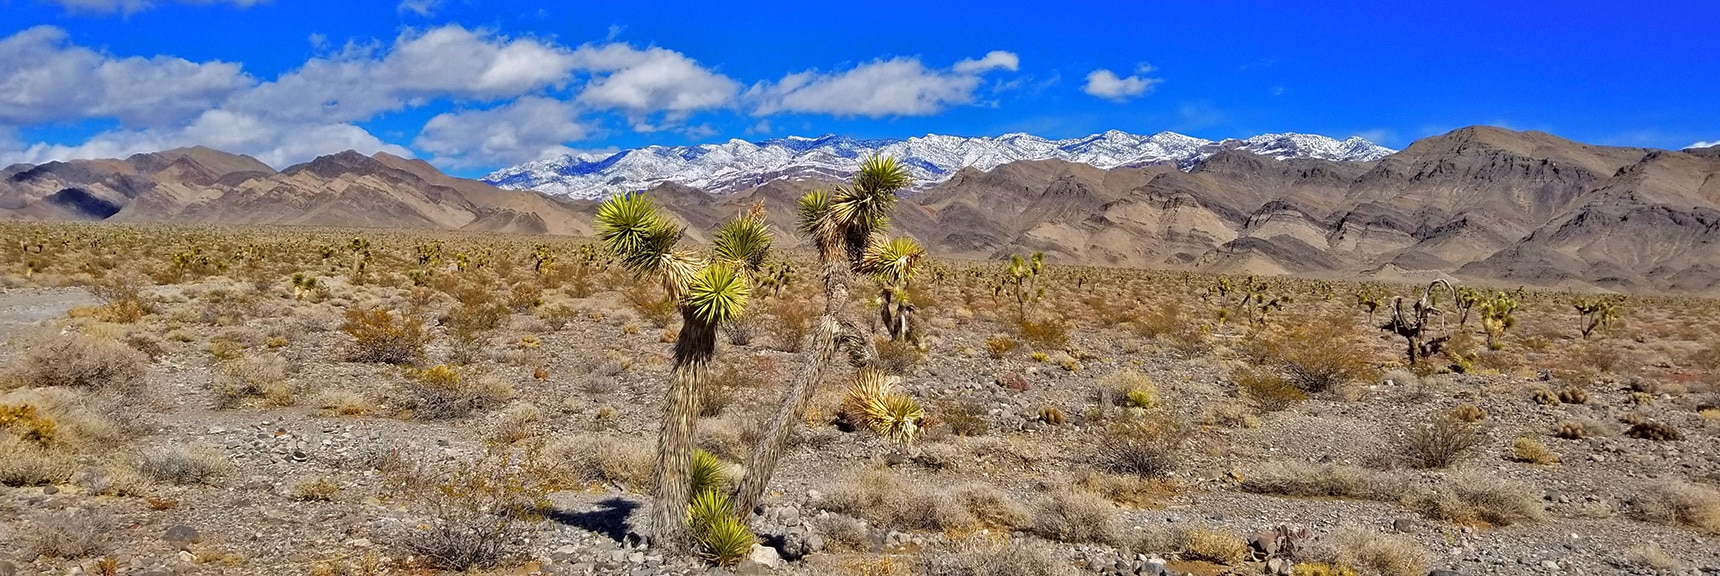 View of Northern Sheep Range from Cow Camp Road Near Entrance | Cow Camp Road | Sheep Range | Desert National Wildlife Refuge, Nevada